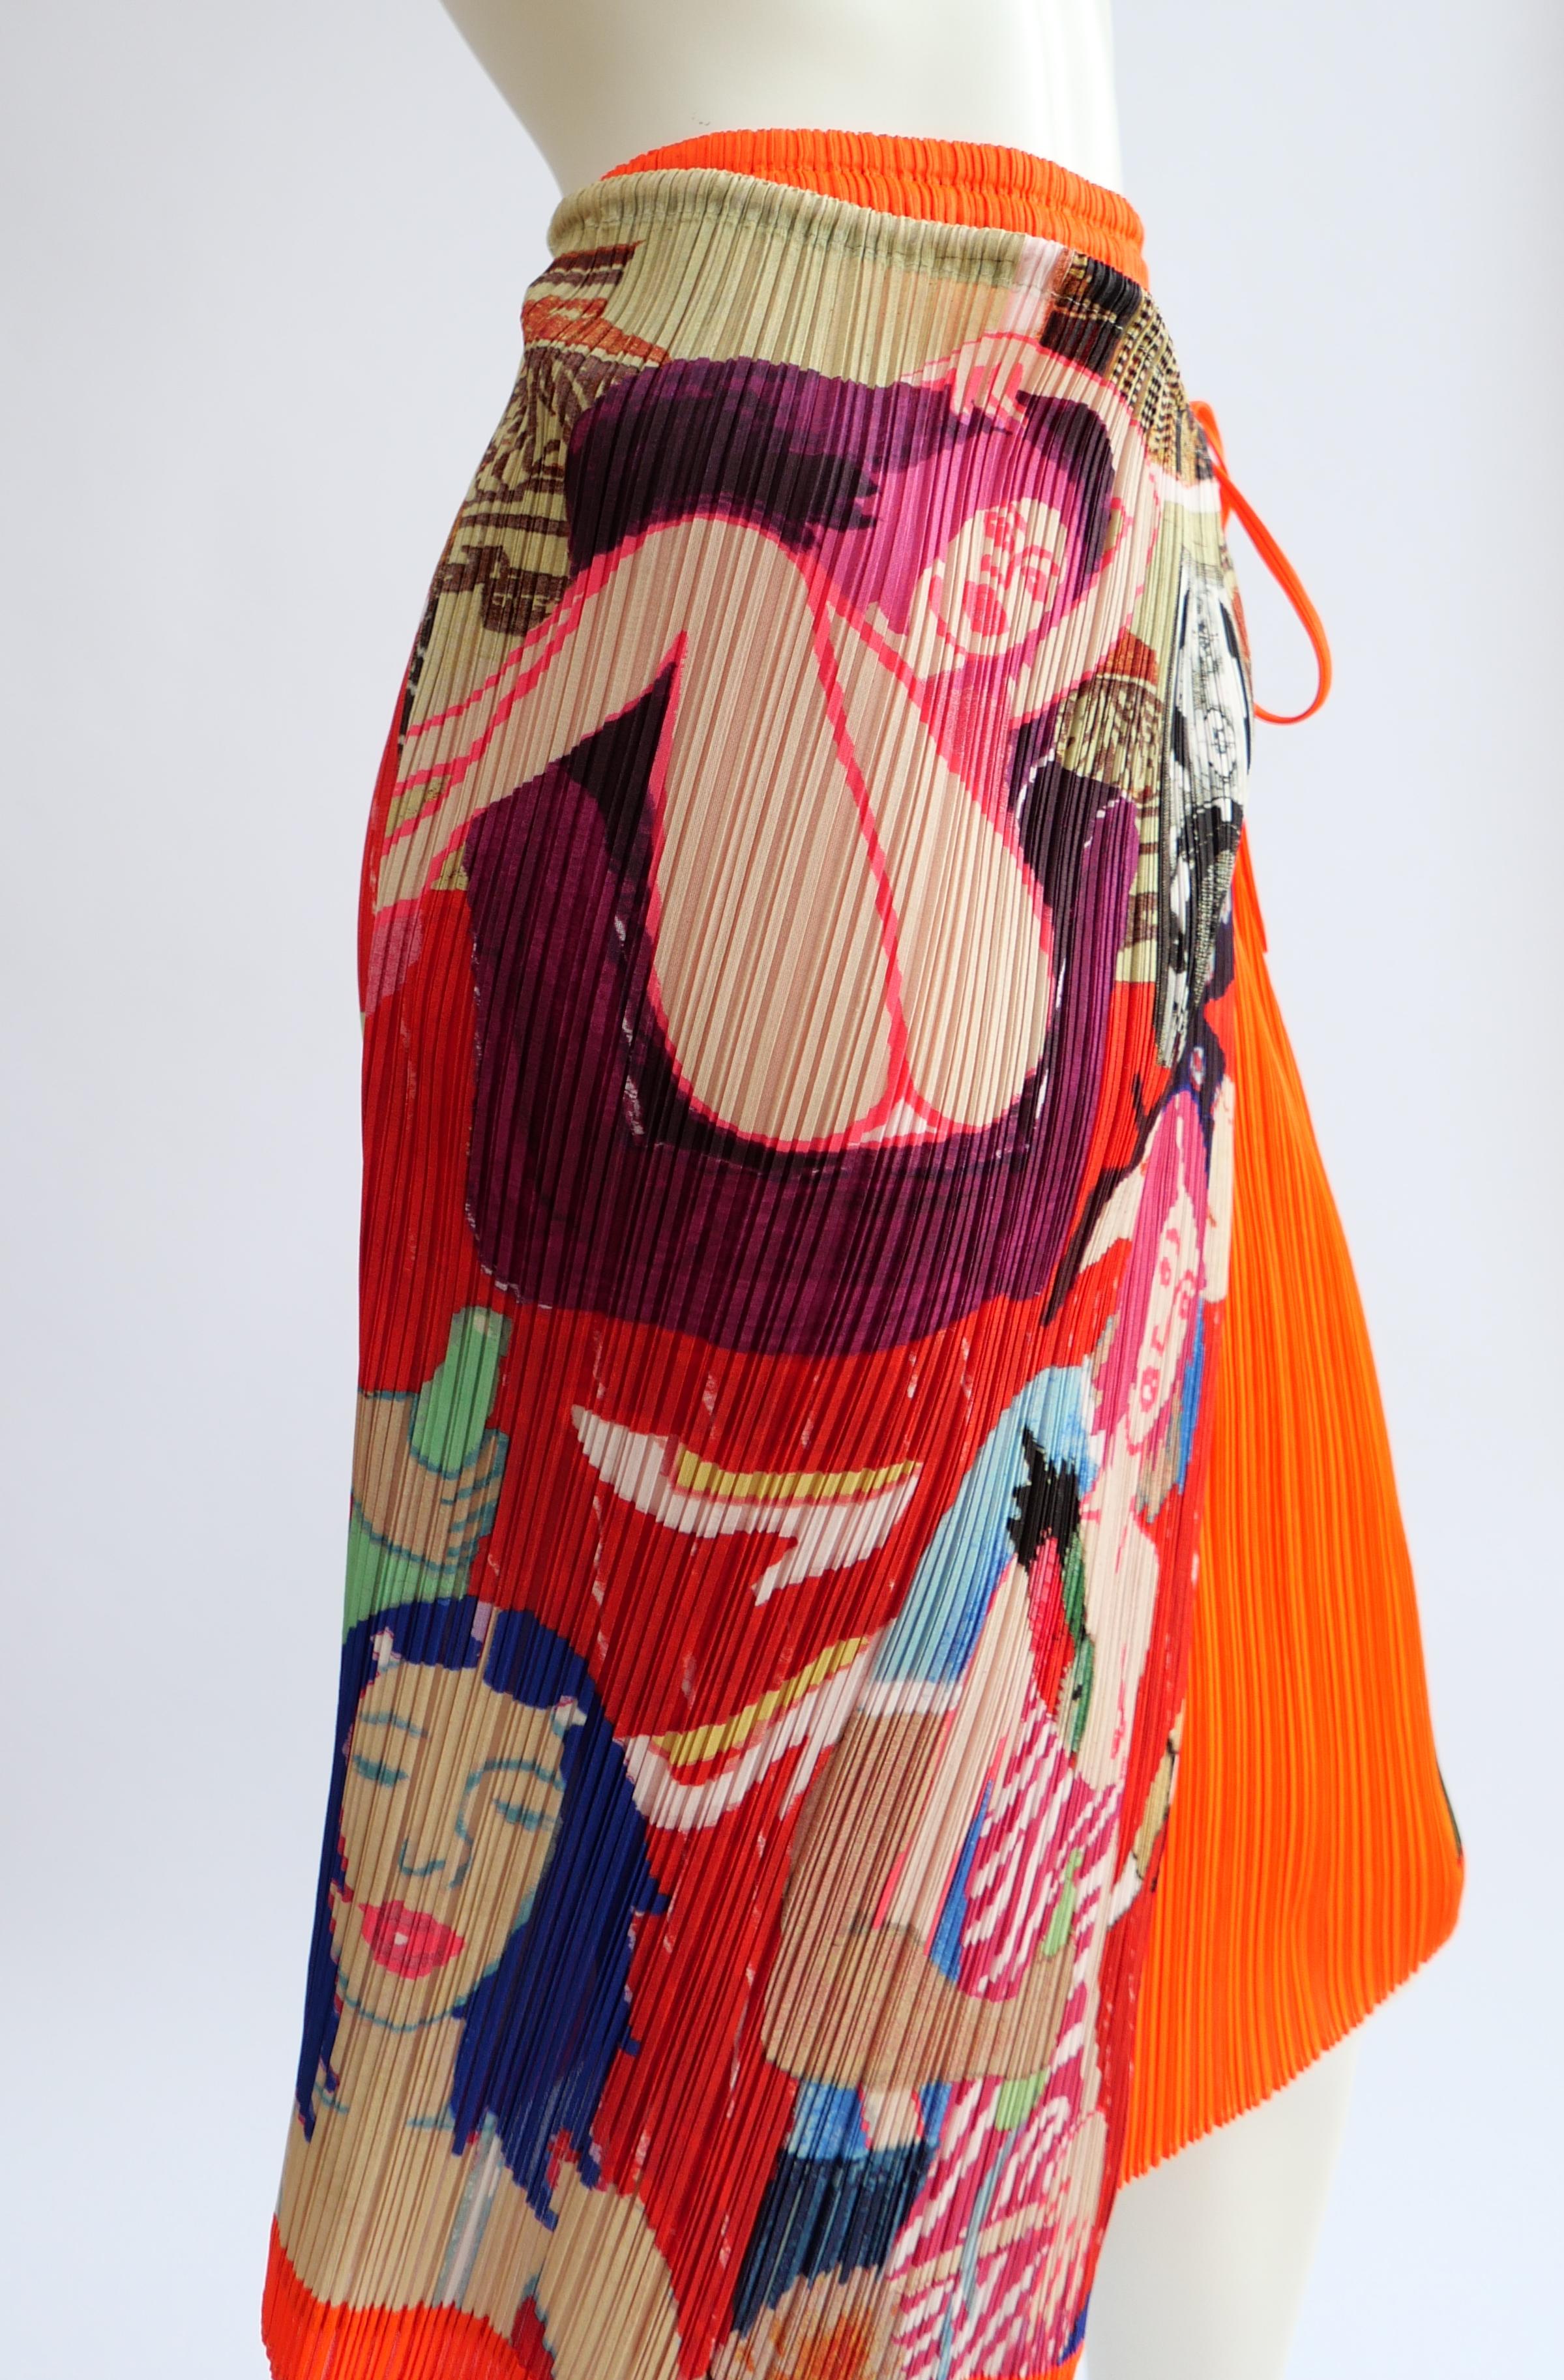  Issey Miyake Skirt With Art Illustration Print
Issey Miyake skirt with bright colours and unique illustration. 
Maker/Artist/Creator/Designer: Issey Miyake
Materials & Techniques: Polyester
Date the piece was created: Unknown